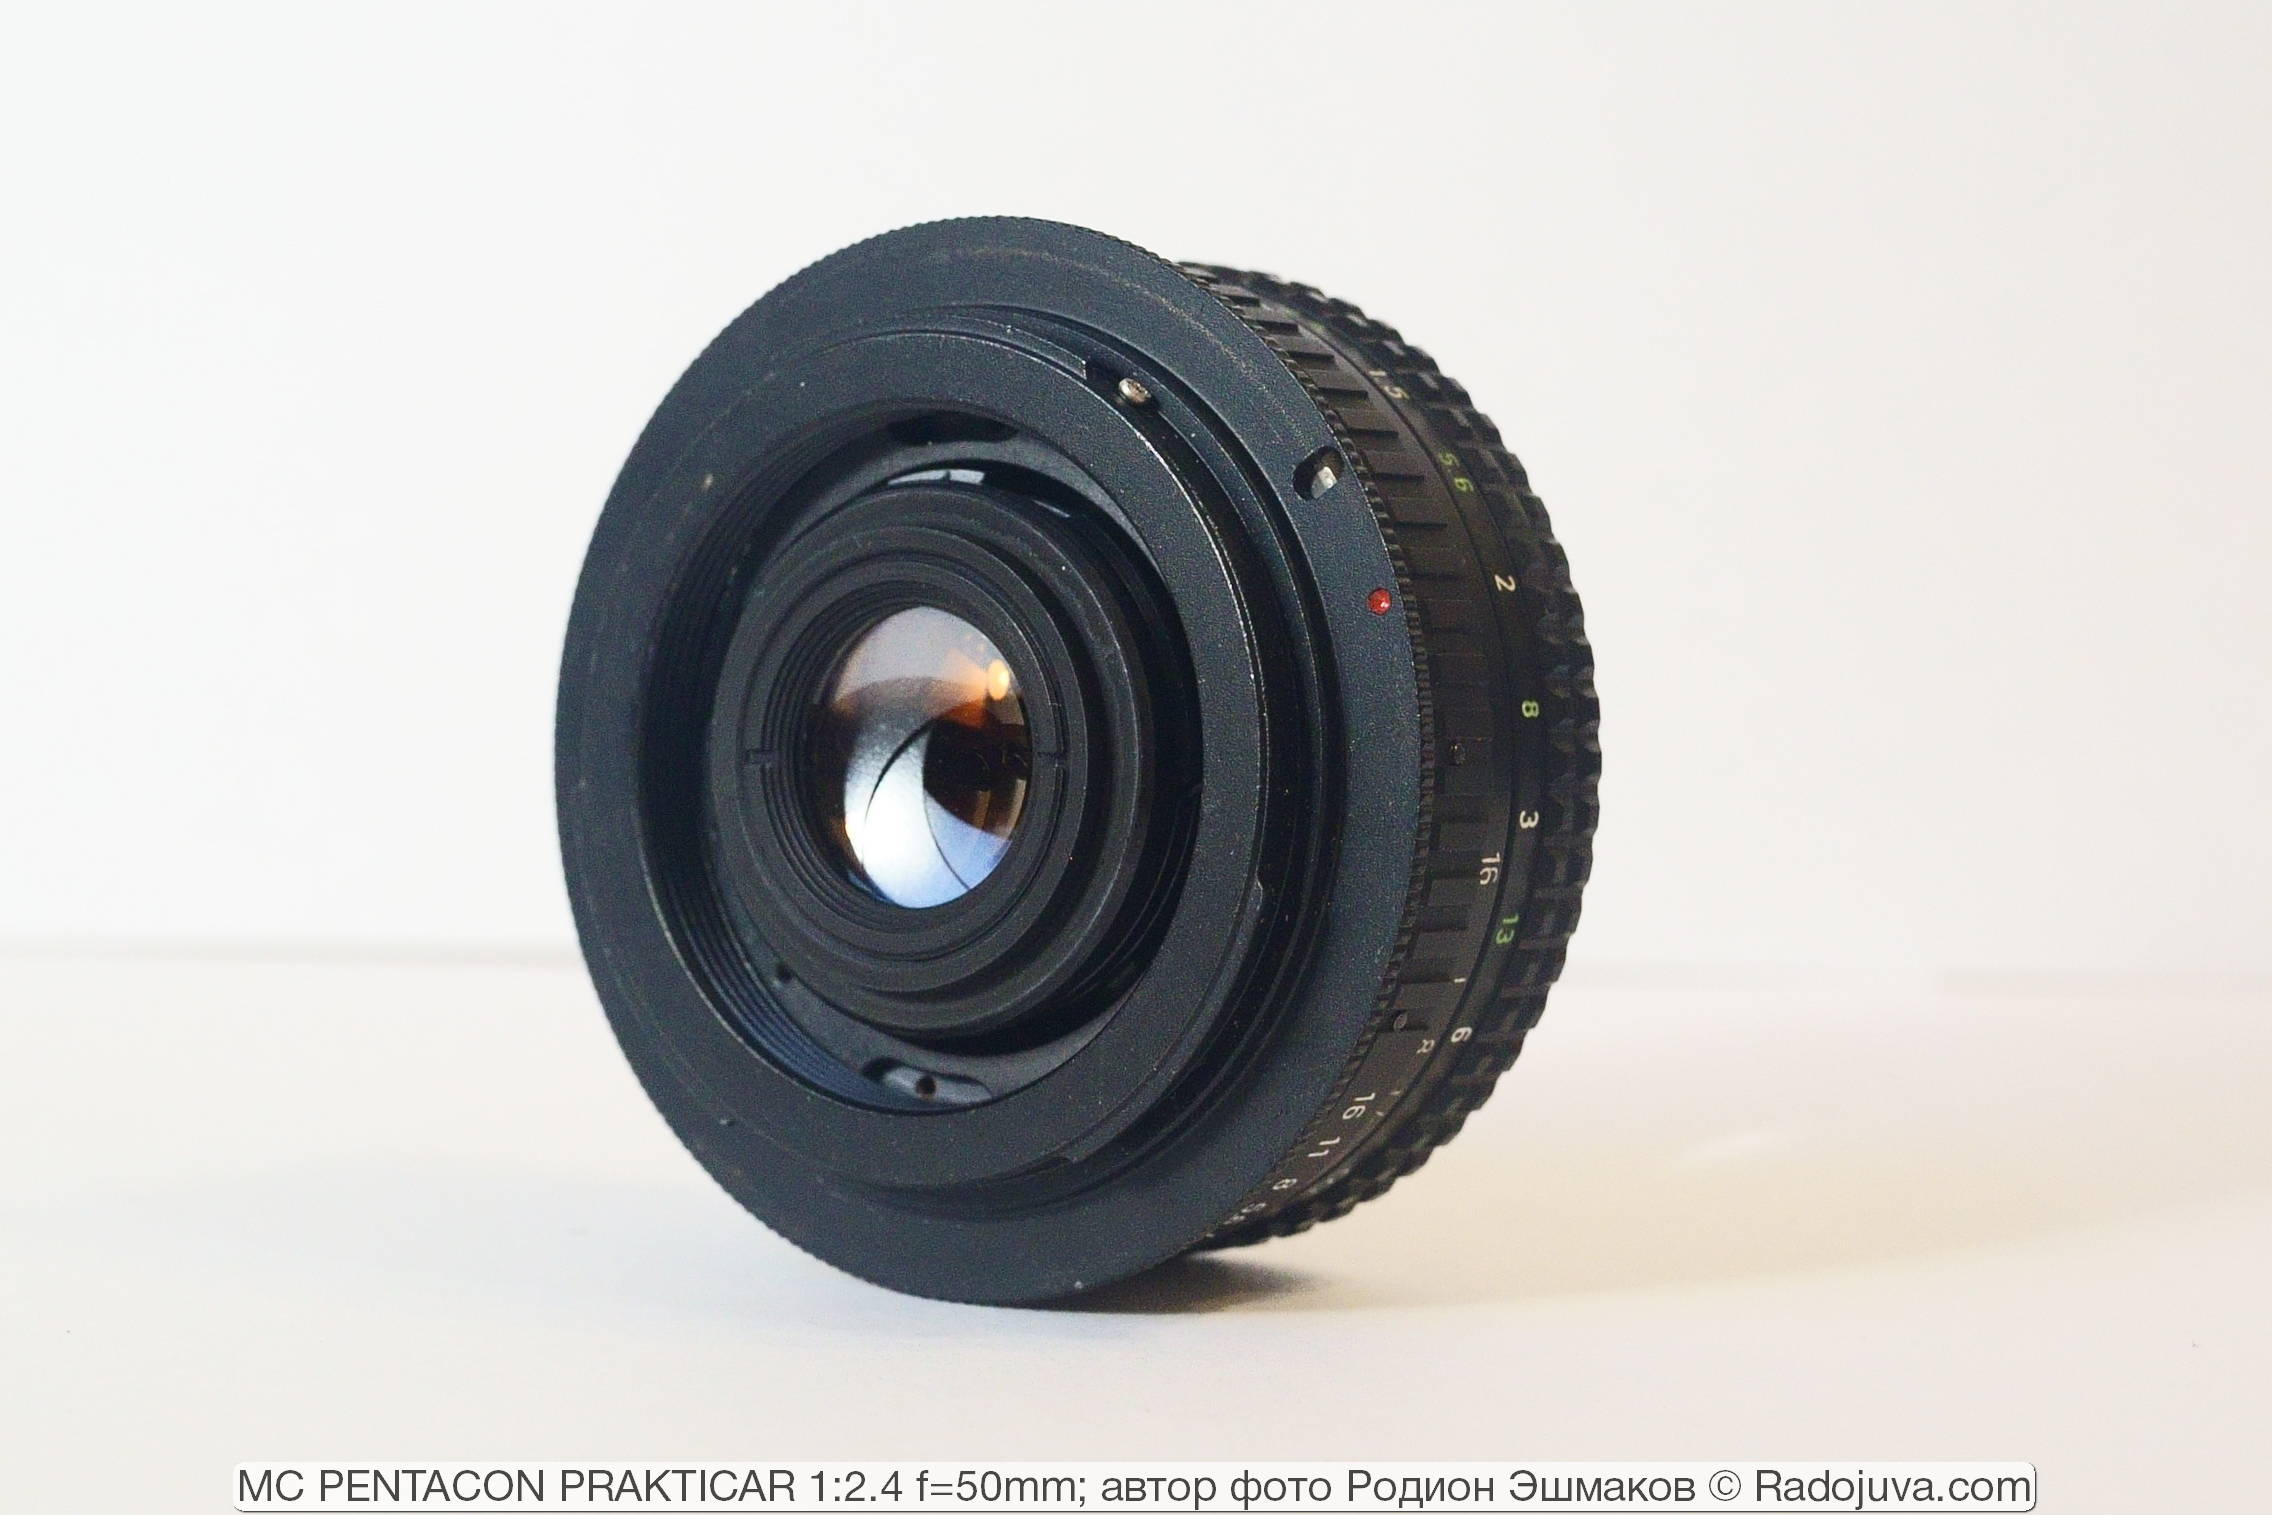 View of the adapted Prakticar 50 / 2.4 from the EF mount side.